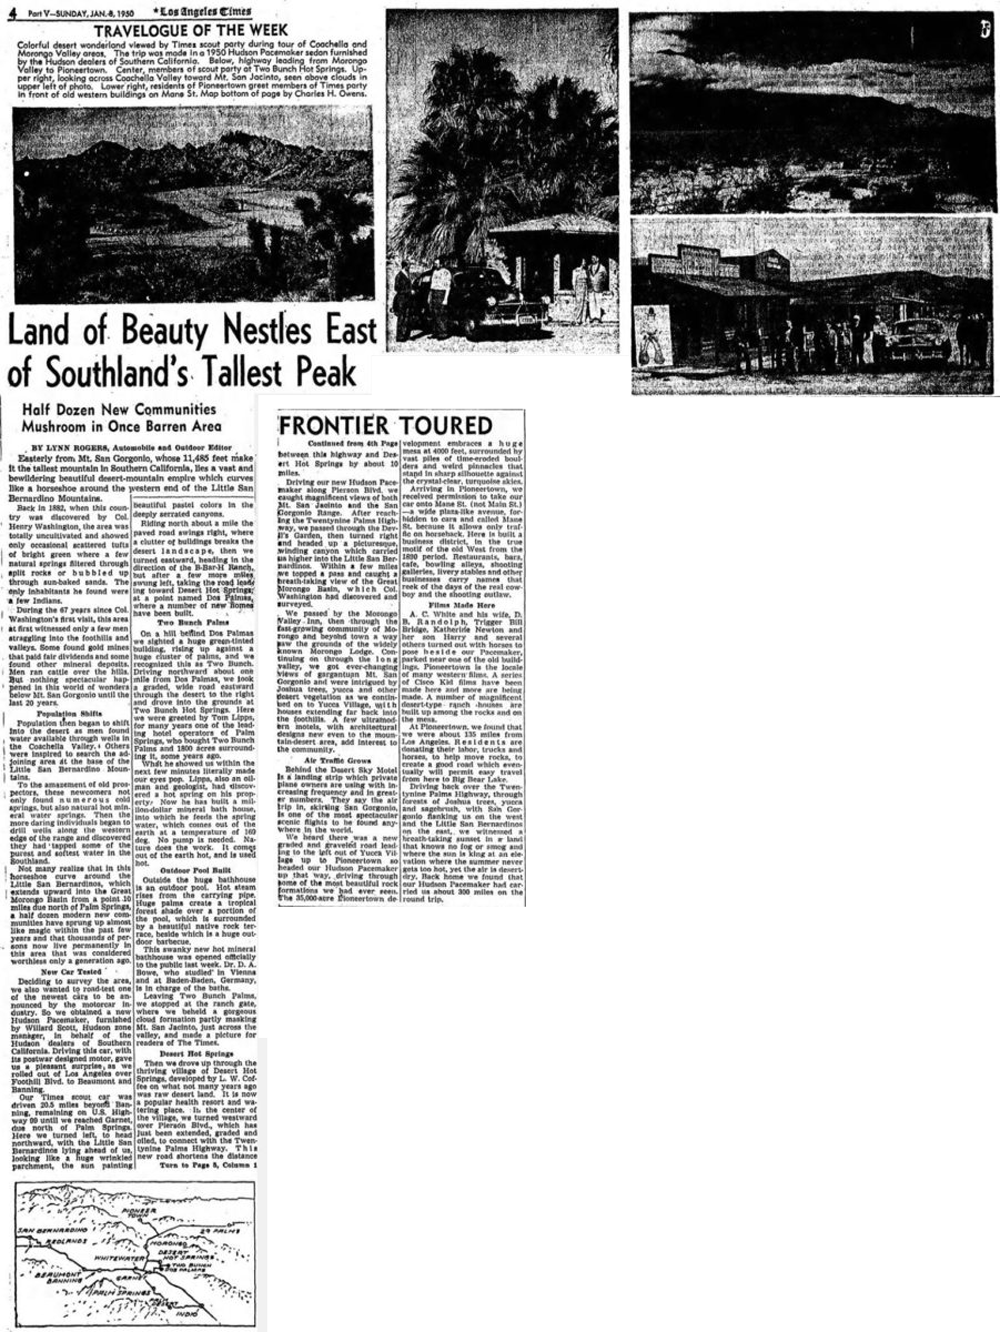 Jan. 8, 1950 - The Los Angeles Times artcile clipping